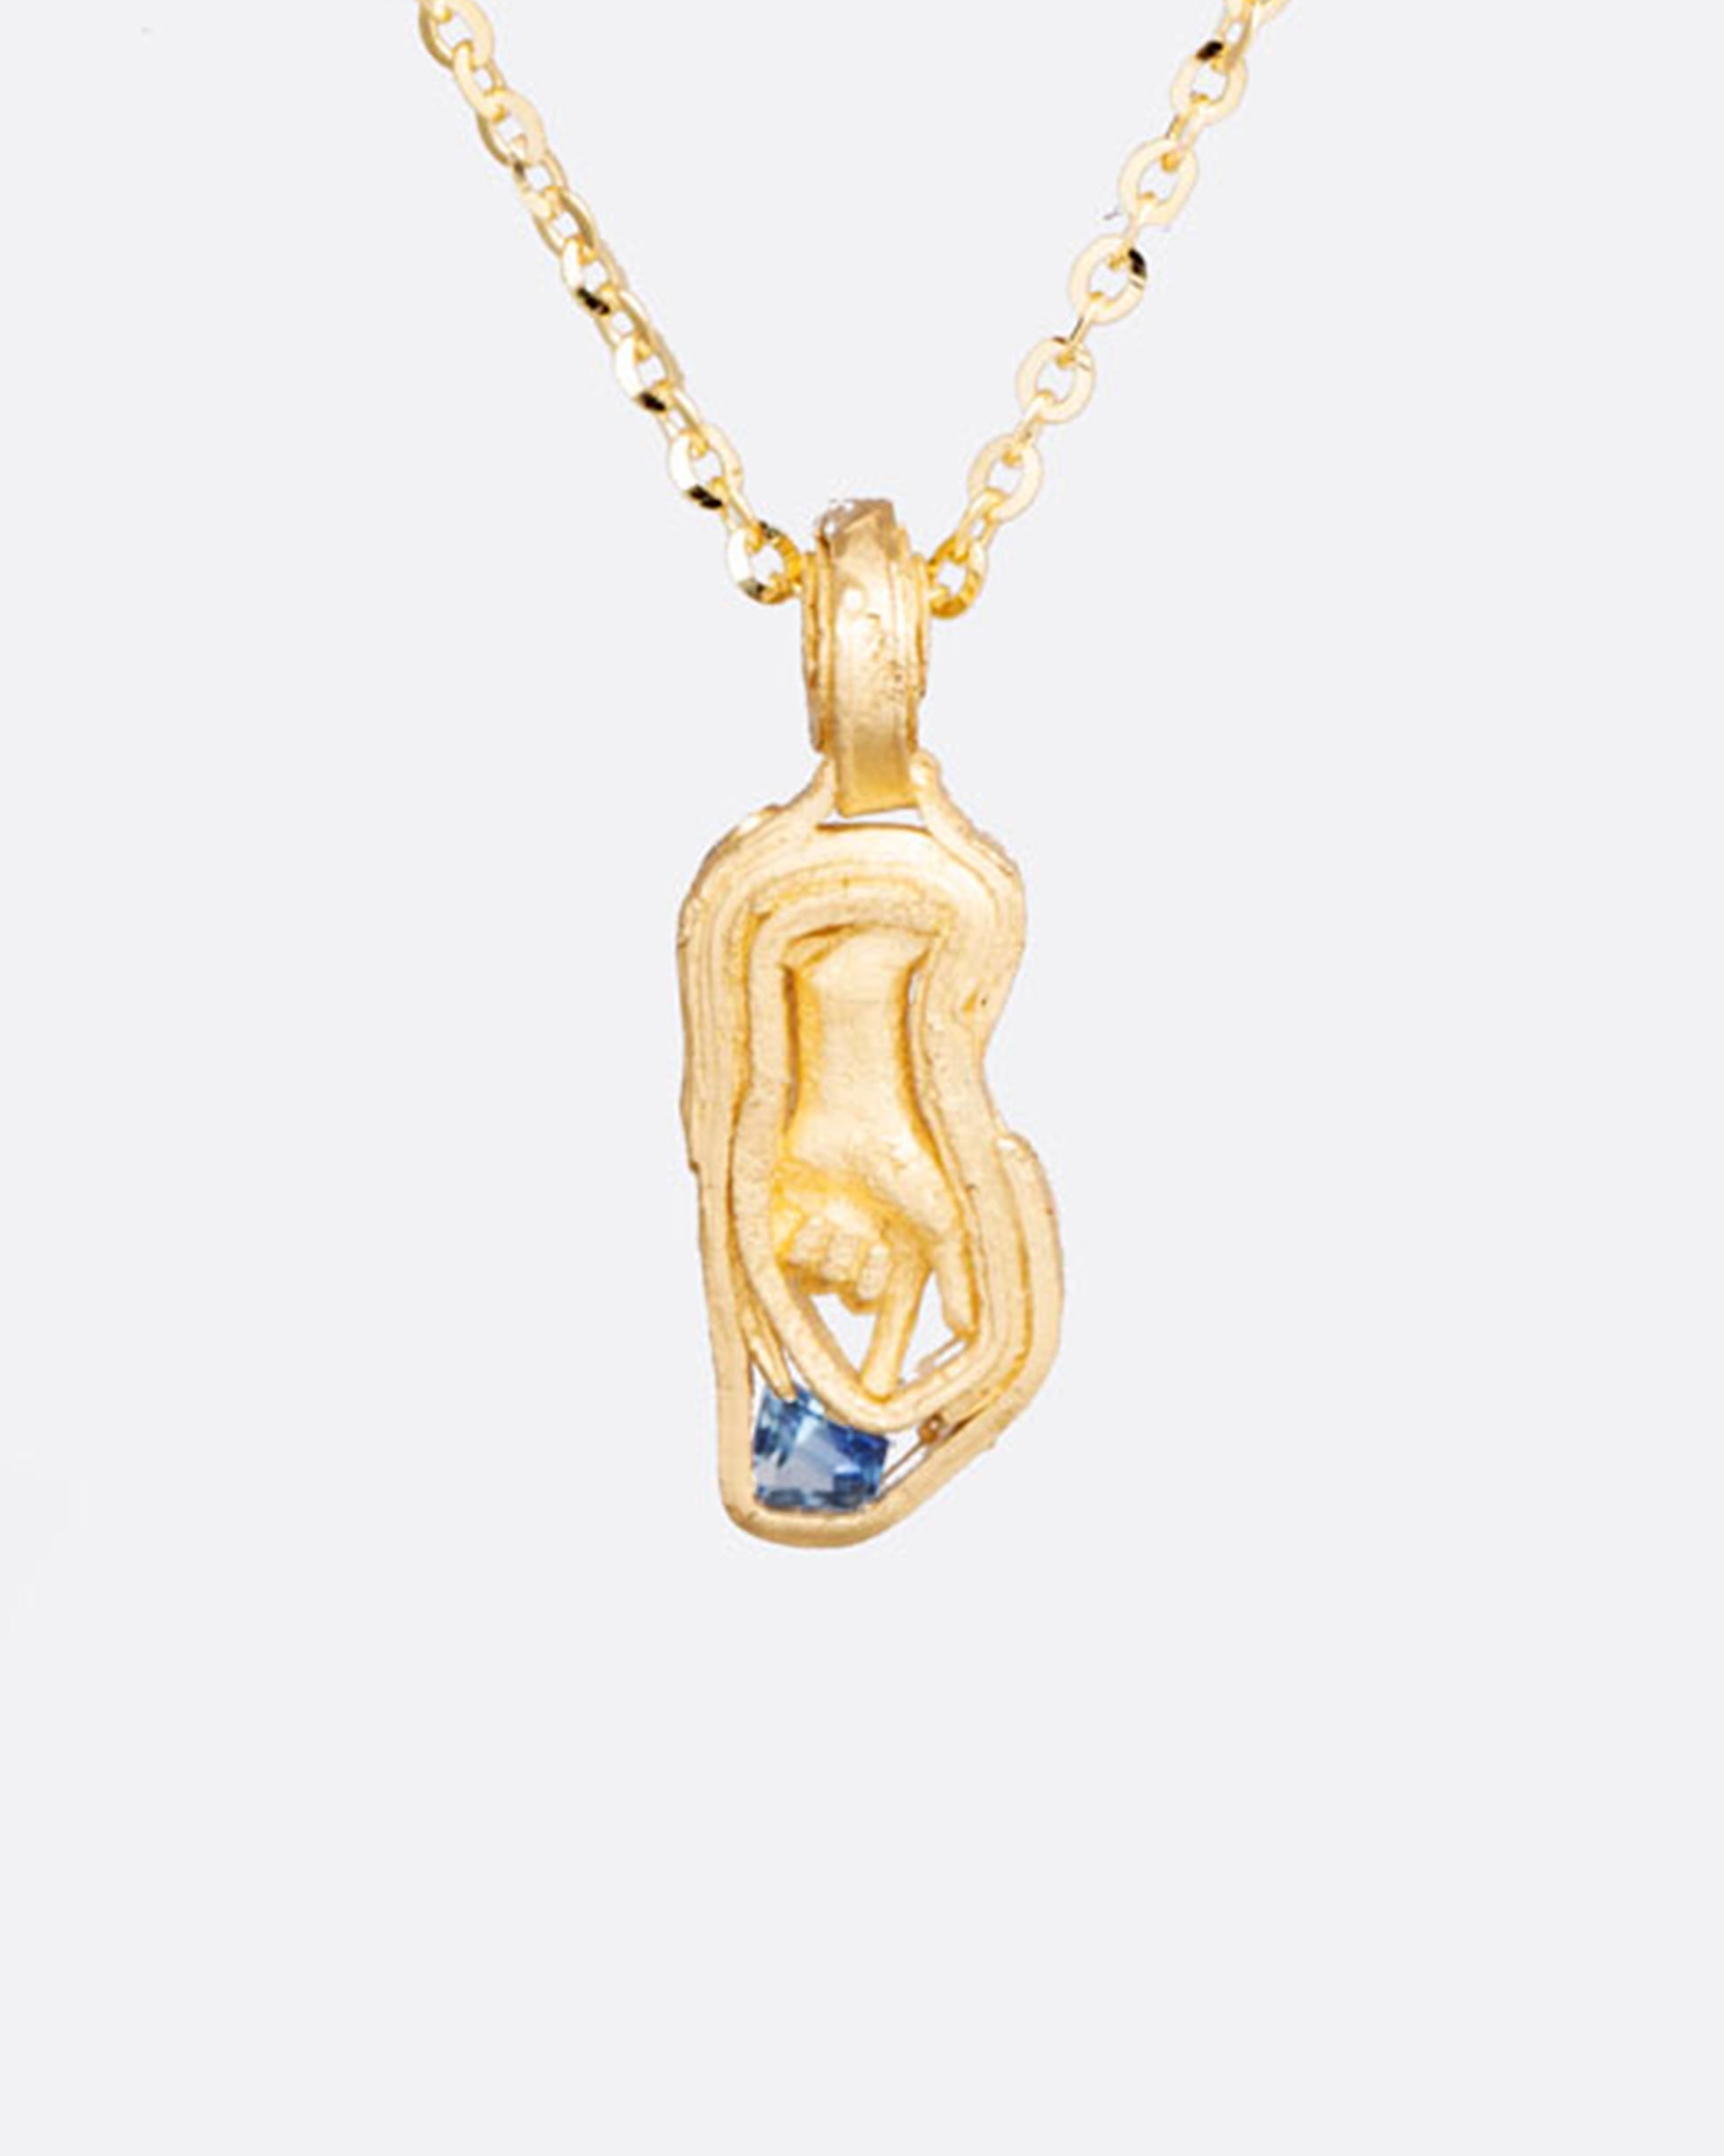 An intricate sculptural hand is surrounded by wrapped yellow gold. Its finger points, directing the eye, to the small blue sapphire at the tip of the pendant.